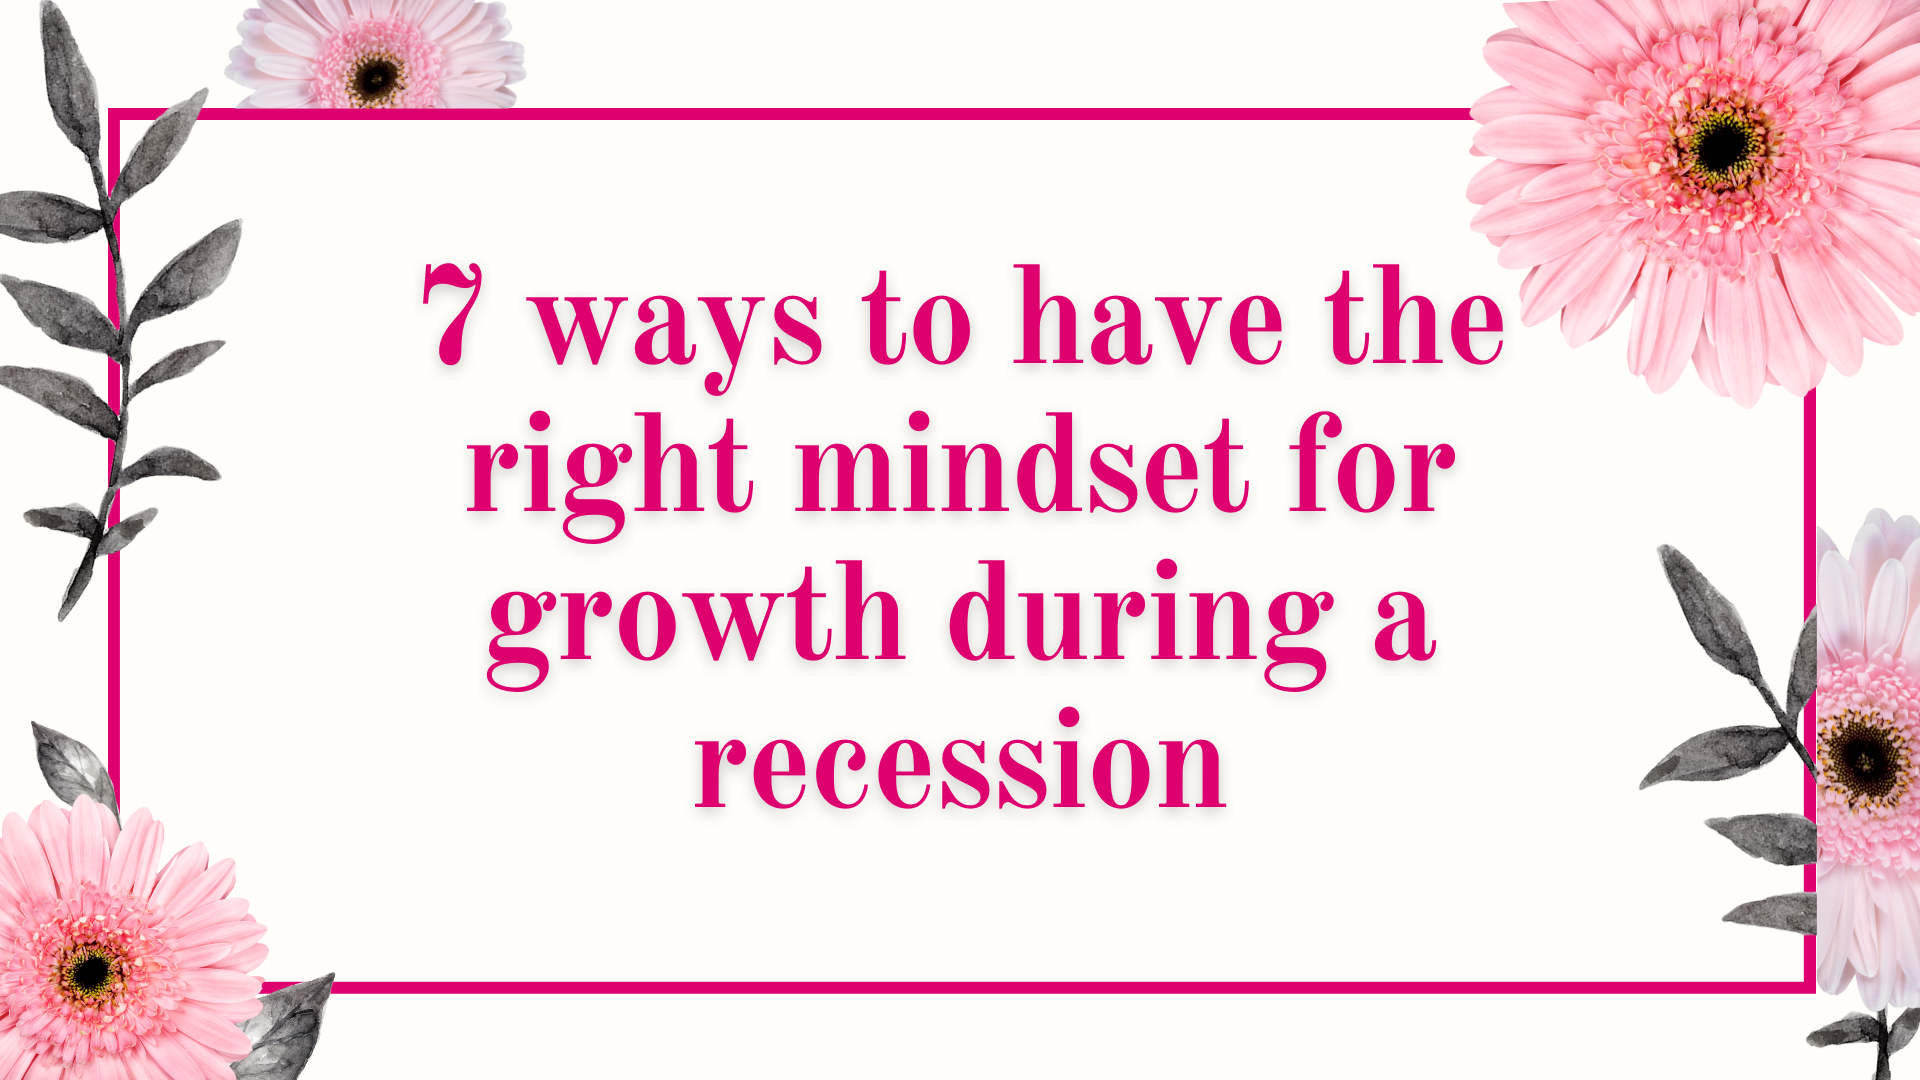 7 ways to have the right mindset for growth during a recession